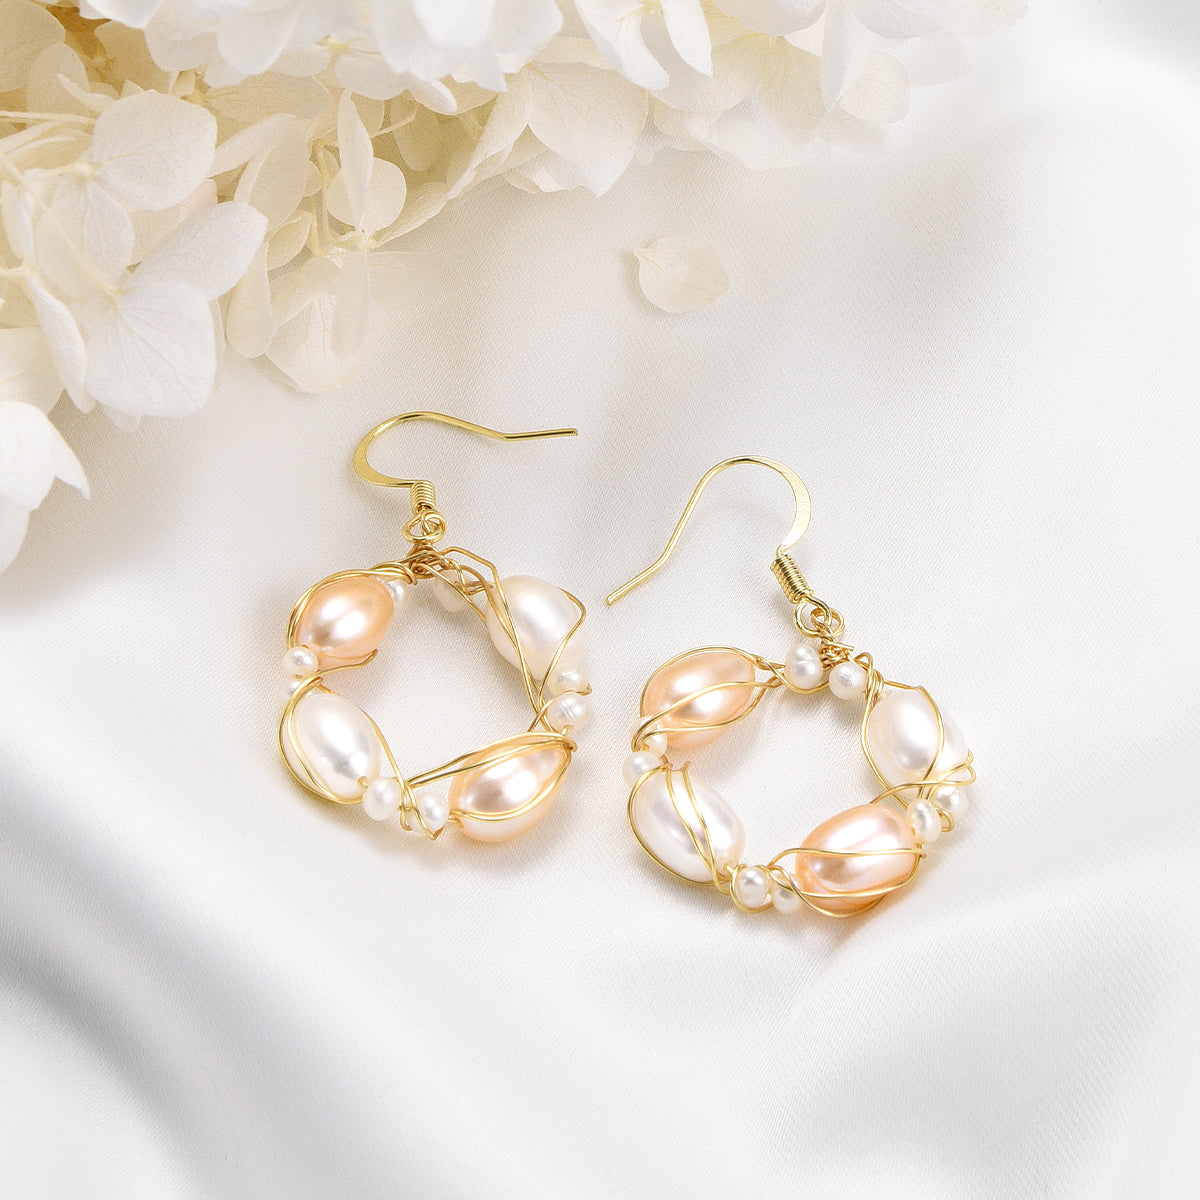 Peachy and white colored flower throne earrings